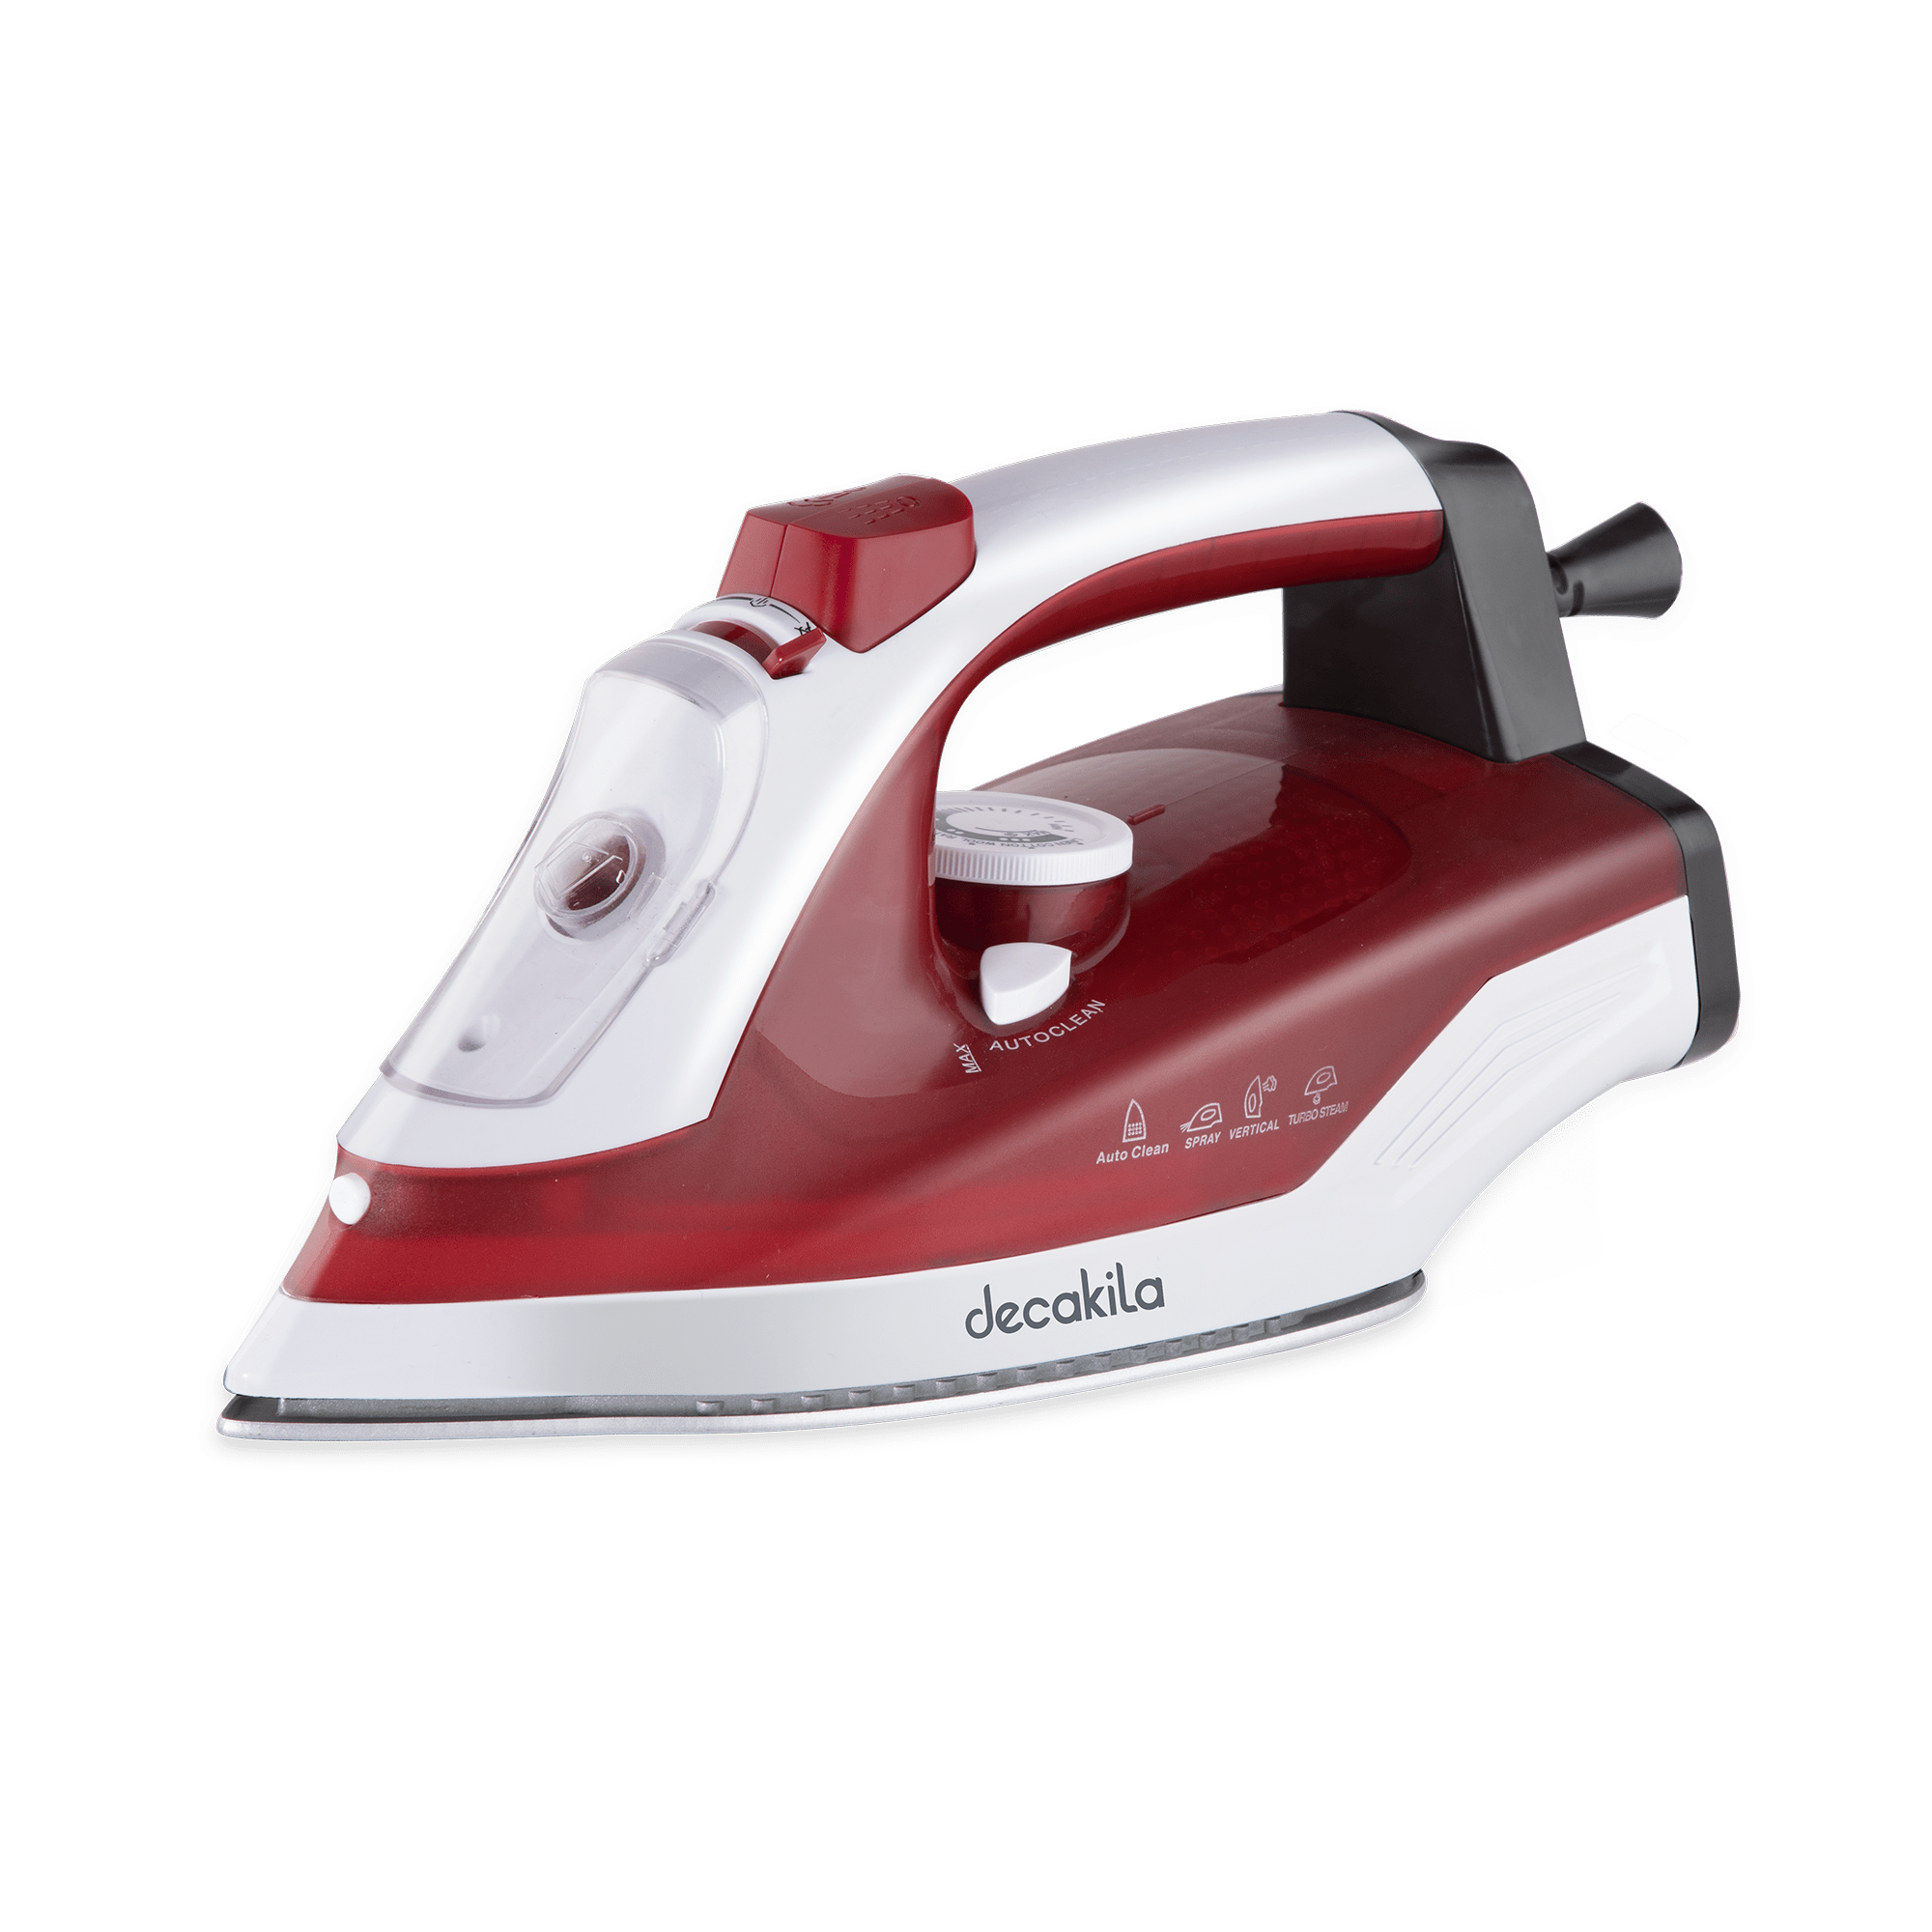 Buy Decakila Steam Iron 2400W - KEEN022R Online in Ghana - Supply Master Electric Iron Buy Tools hardware Building materials